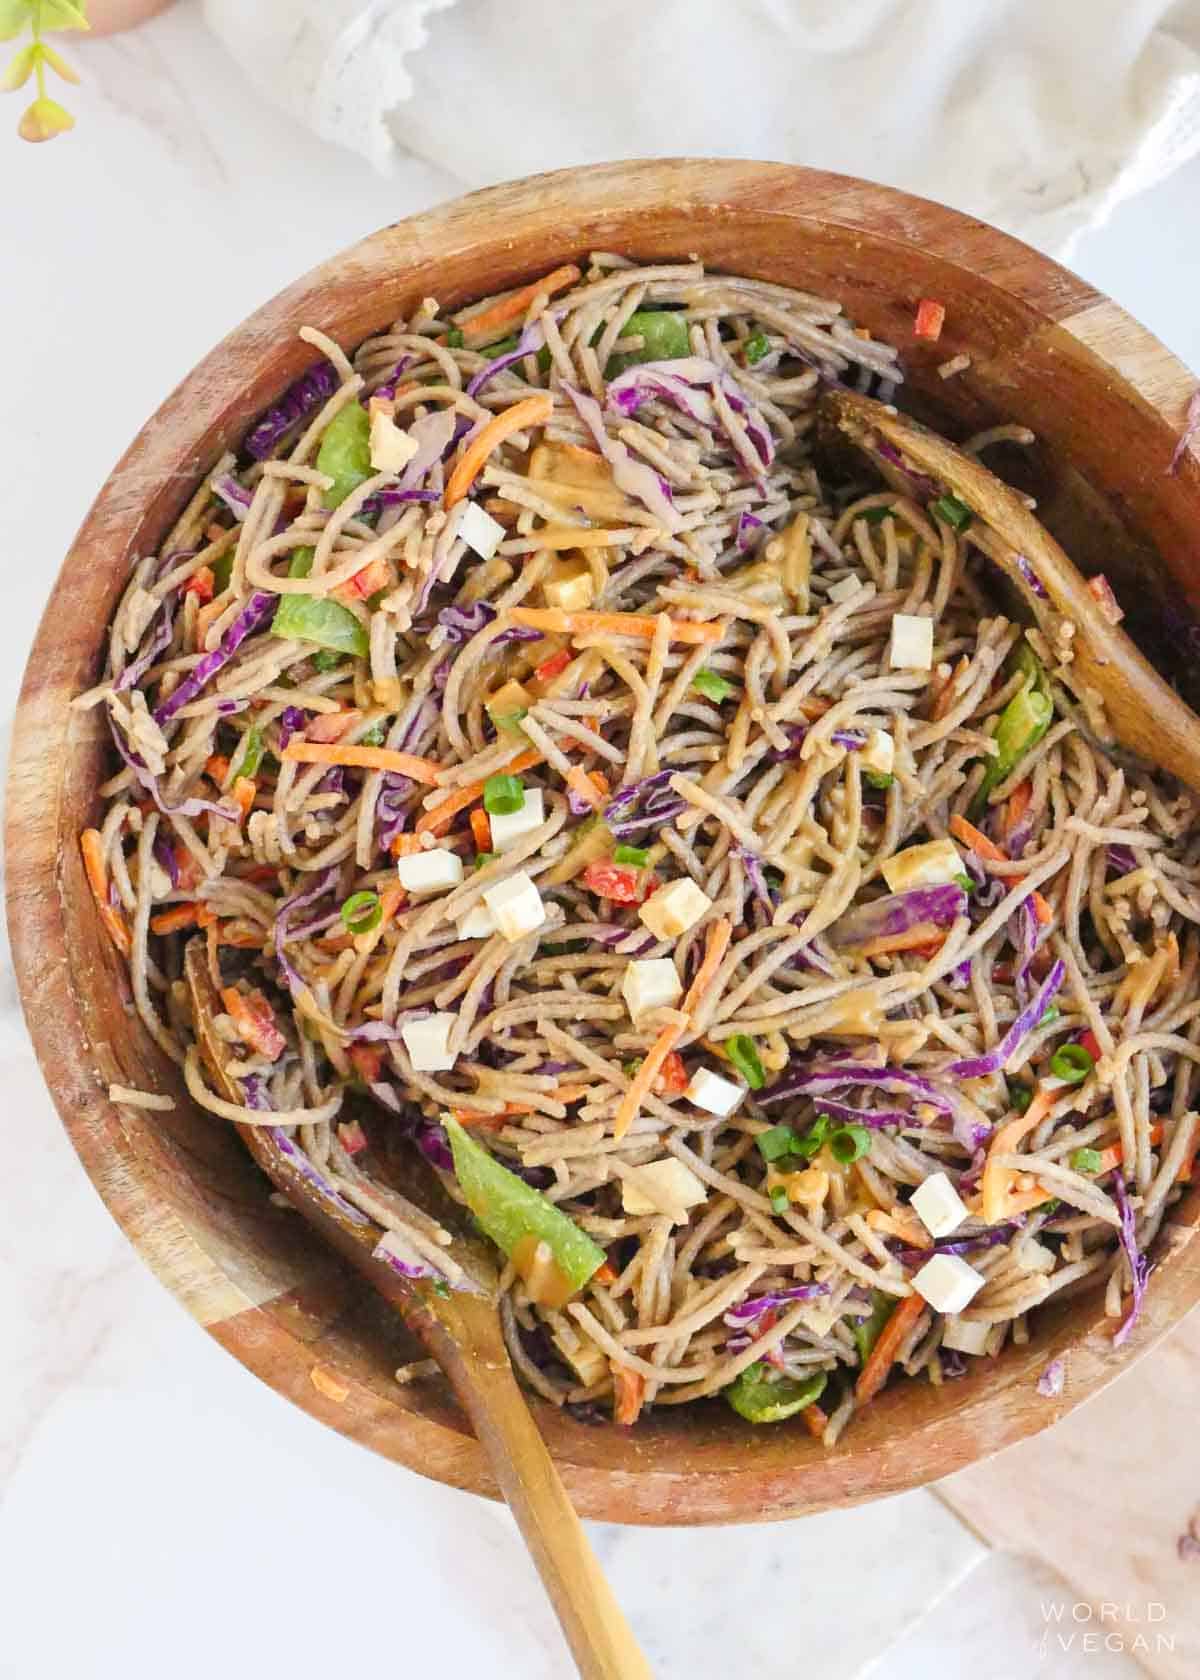 The cold noodle salad in a large mixing bowl after everything has been mixed together with the peanut sauce.